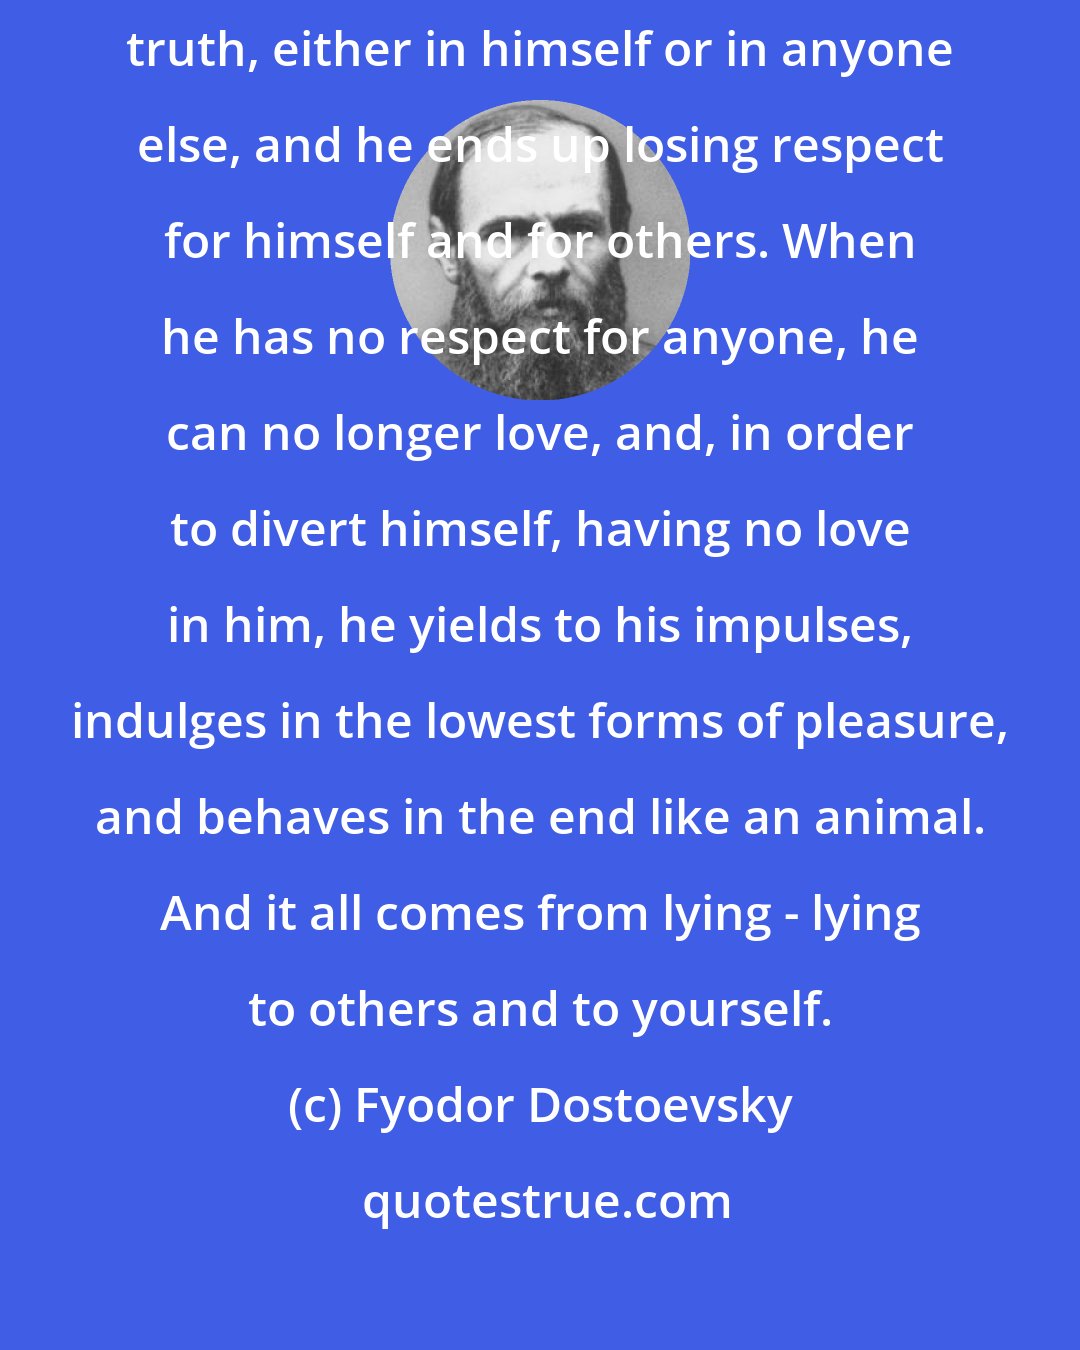 Fyodor Dostoevsky: A man who lies to himself, and believes his own lies becomes unable to recognize truth, either in himself or in anyone else, and he ends up losing respect for himself and for others. When he has no respect for anyone, he can no longer love, and, in order to divert himself, having no love in him, he yields to his impulses, indulges in the lowest forms of pleasure, and behaves in the end like an animal. And it all comes from lying - lying to others and to yourself.